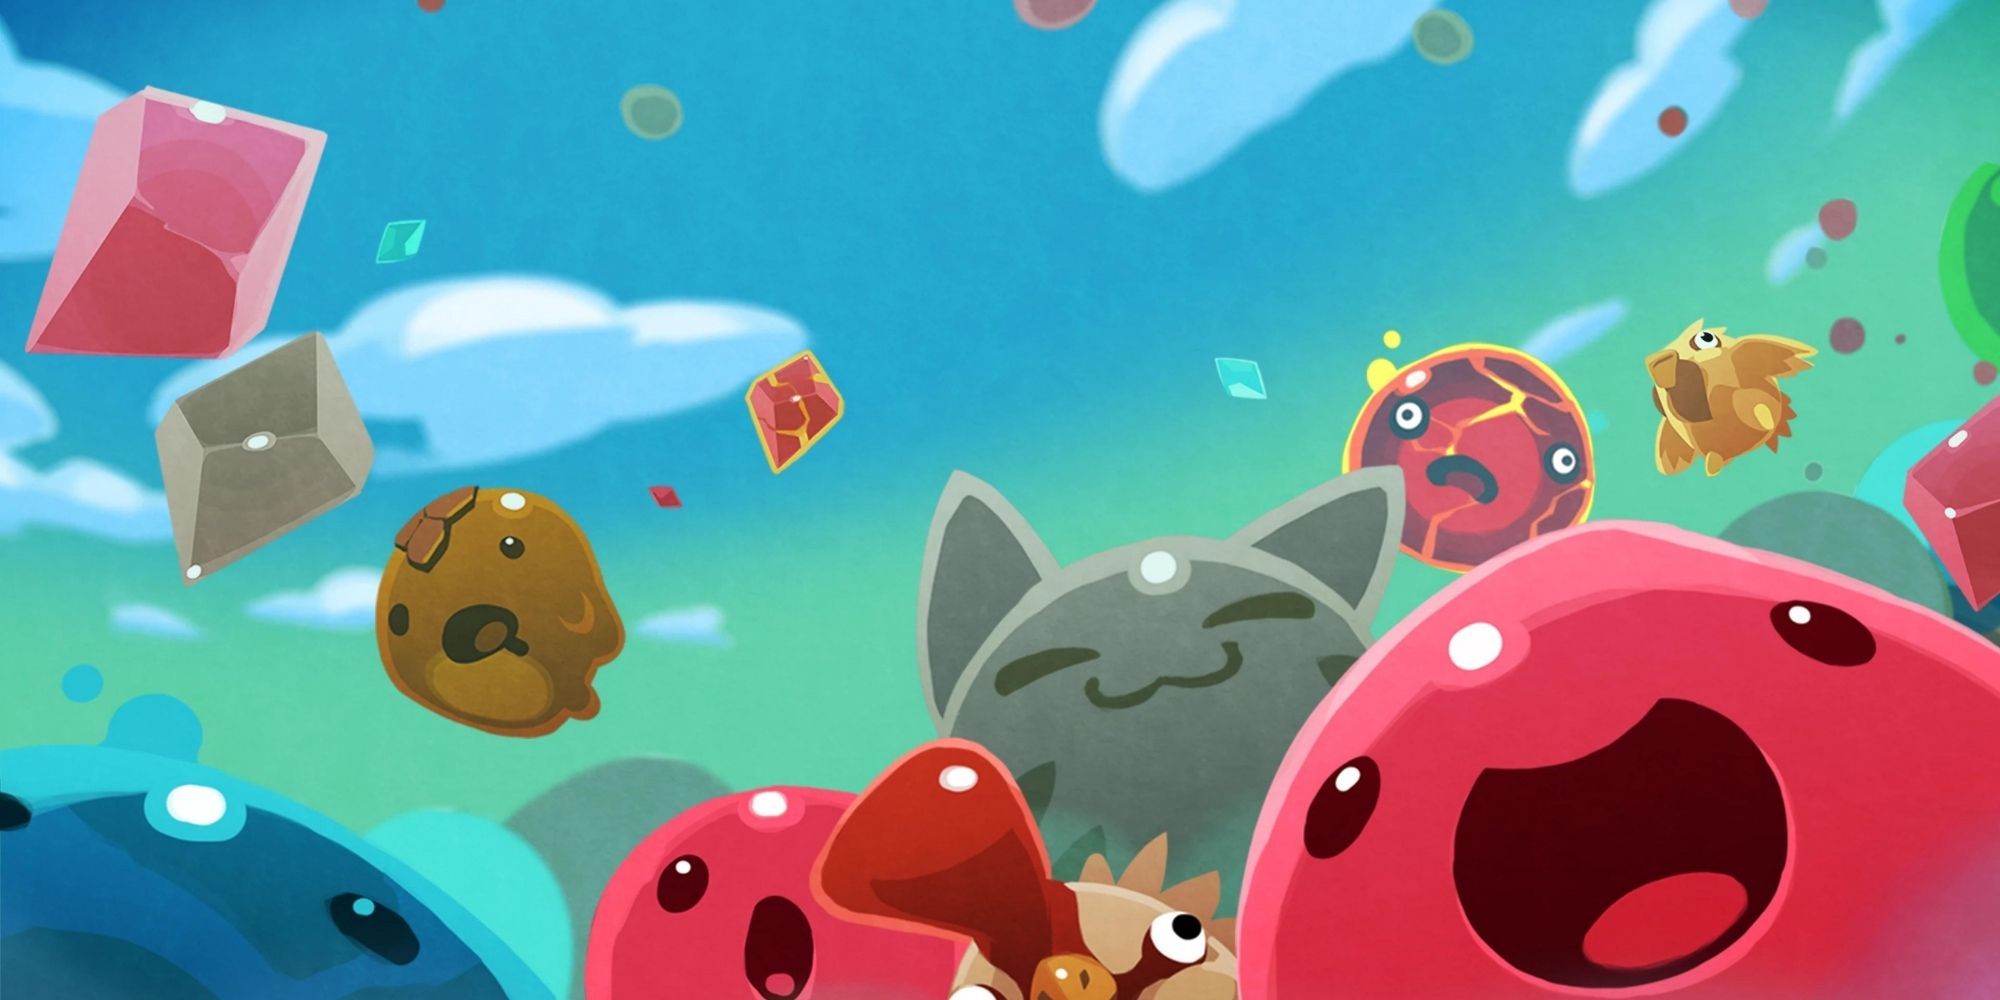 Slime Rancher Many Kinds Of Slimes Bounce Around While Smiling and Looking Shocked